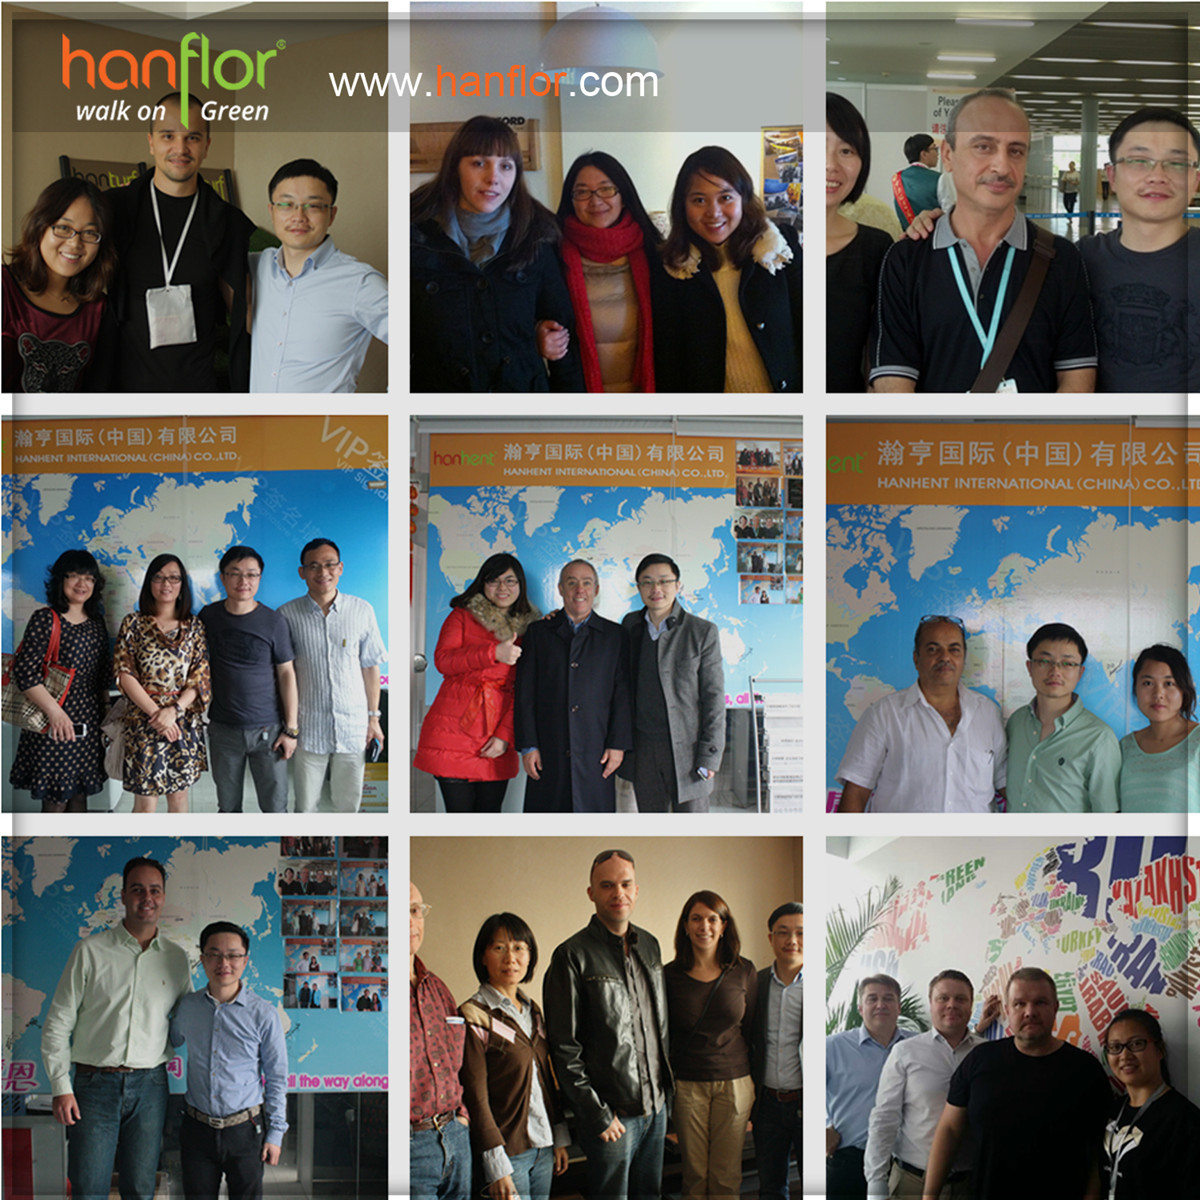 9.Customers:Many customer and clients visit our office and check the pvc floor, confirm the cooperation with us. Many of them we have cooperated for more than 5years and with good friendship, thanks for the trust of our clients and customers, we will do better to support our clients and customers.plastic floor,pvc floor, Vinyl floor, plastic flooring, pvc flooring, Vinyl flooring, pvc plank, vinyl plank, pvc tile, vinyl tile, click vinyl flooring, interlocking vinyl flooring, unilin click flooring, unilin click vinyl flooring, click pvc flooring, interlocking pvc flooring, unilin click vinyl flooring, unilin click pvc flooring 